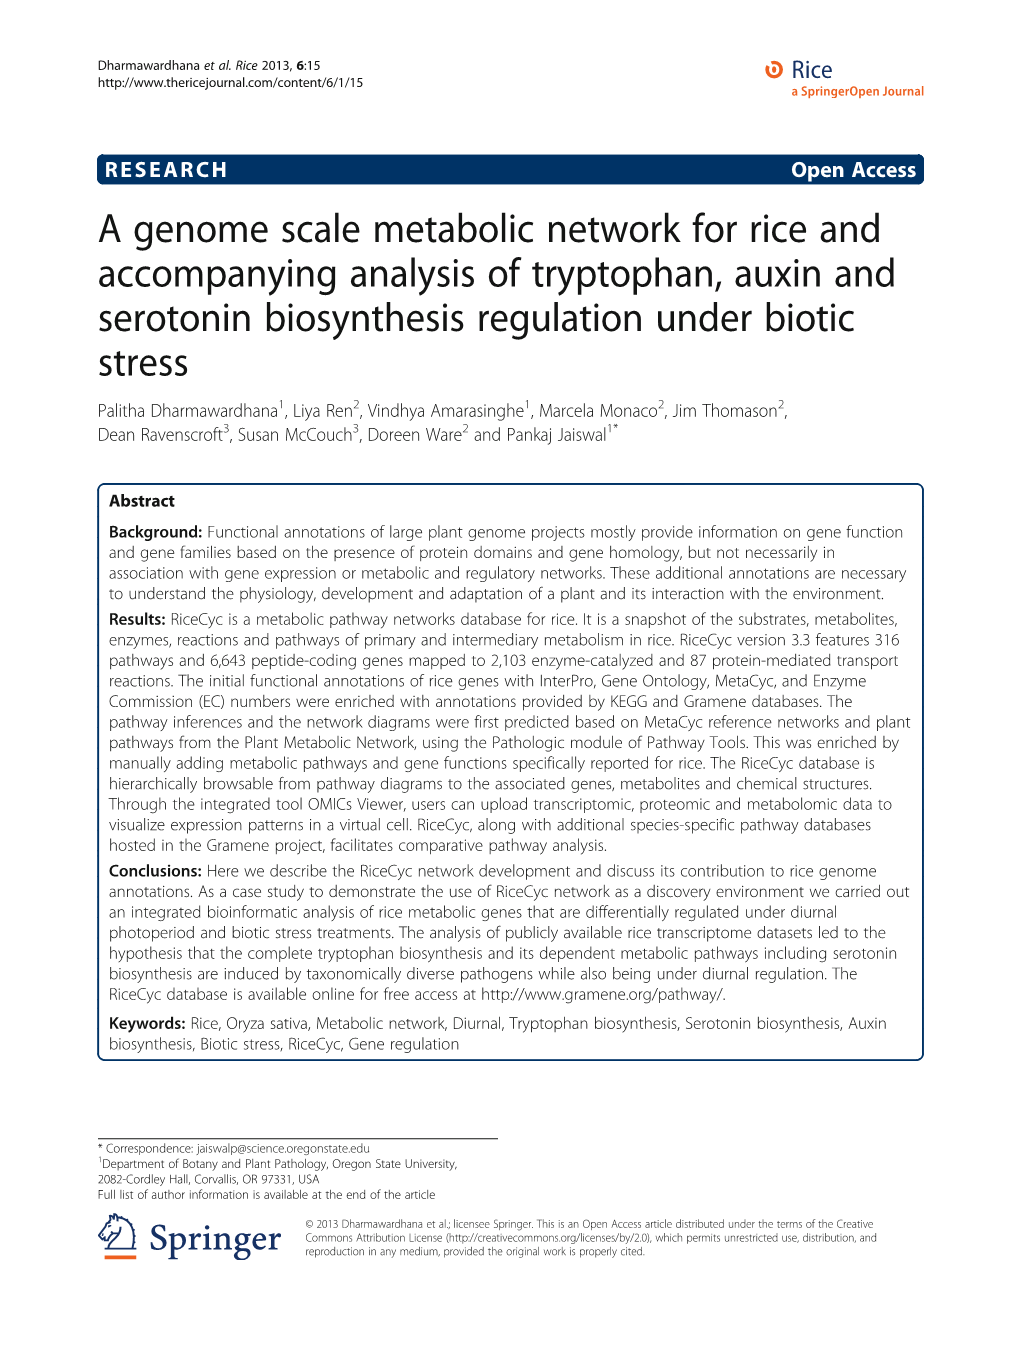 A Genome Scale Metabolic Network for Rice and Accompanying Analysis Of